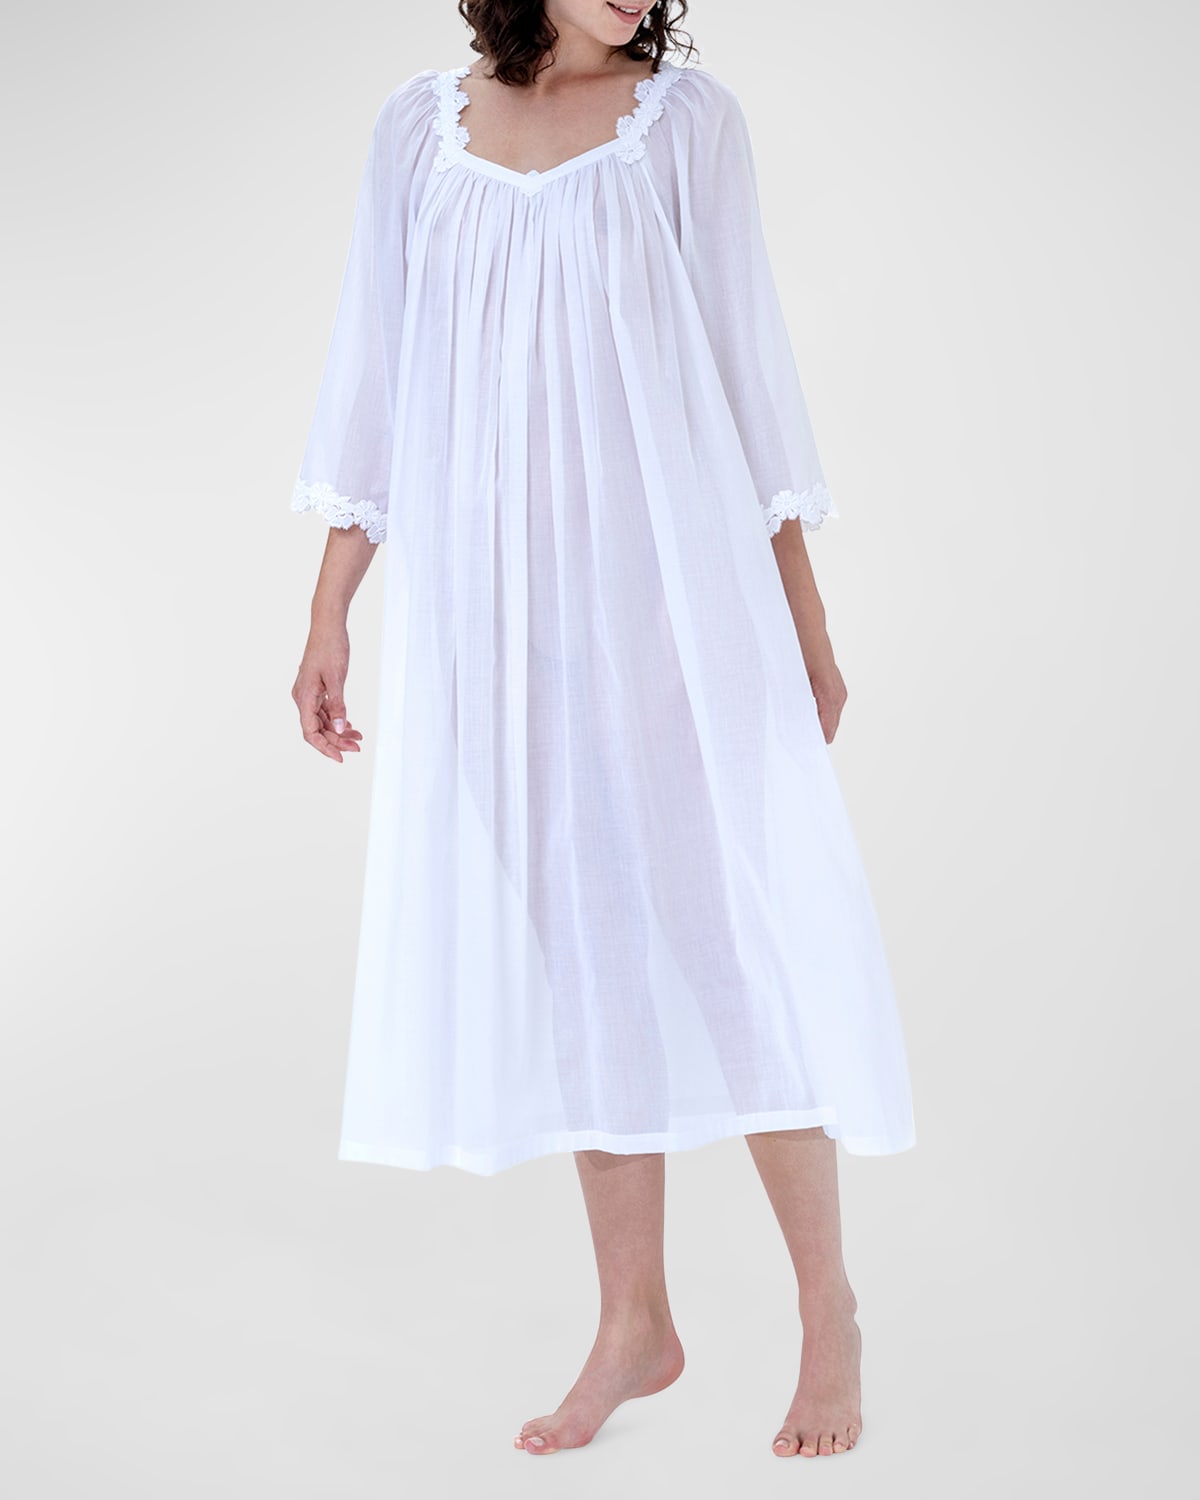 Coralie-3 Ruched Lace-Trim Cotton Nightgown